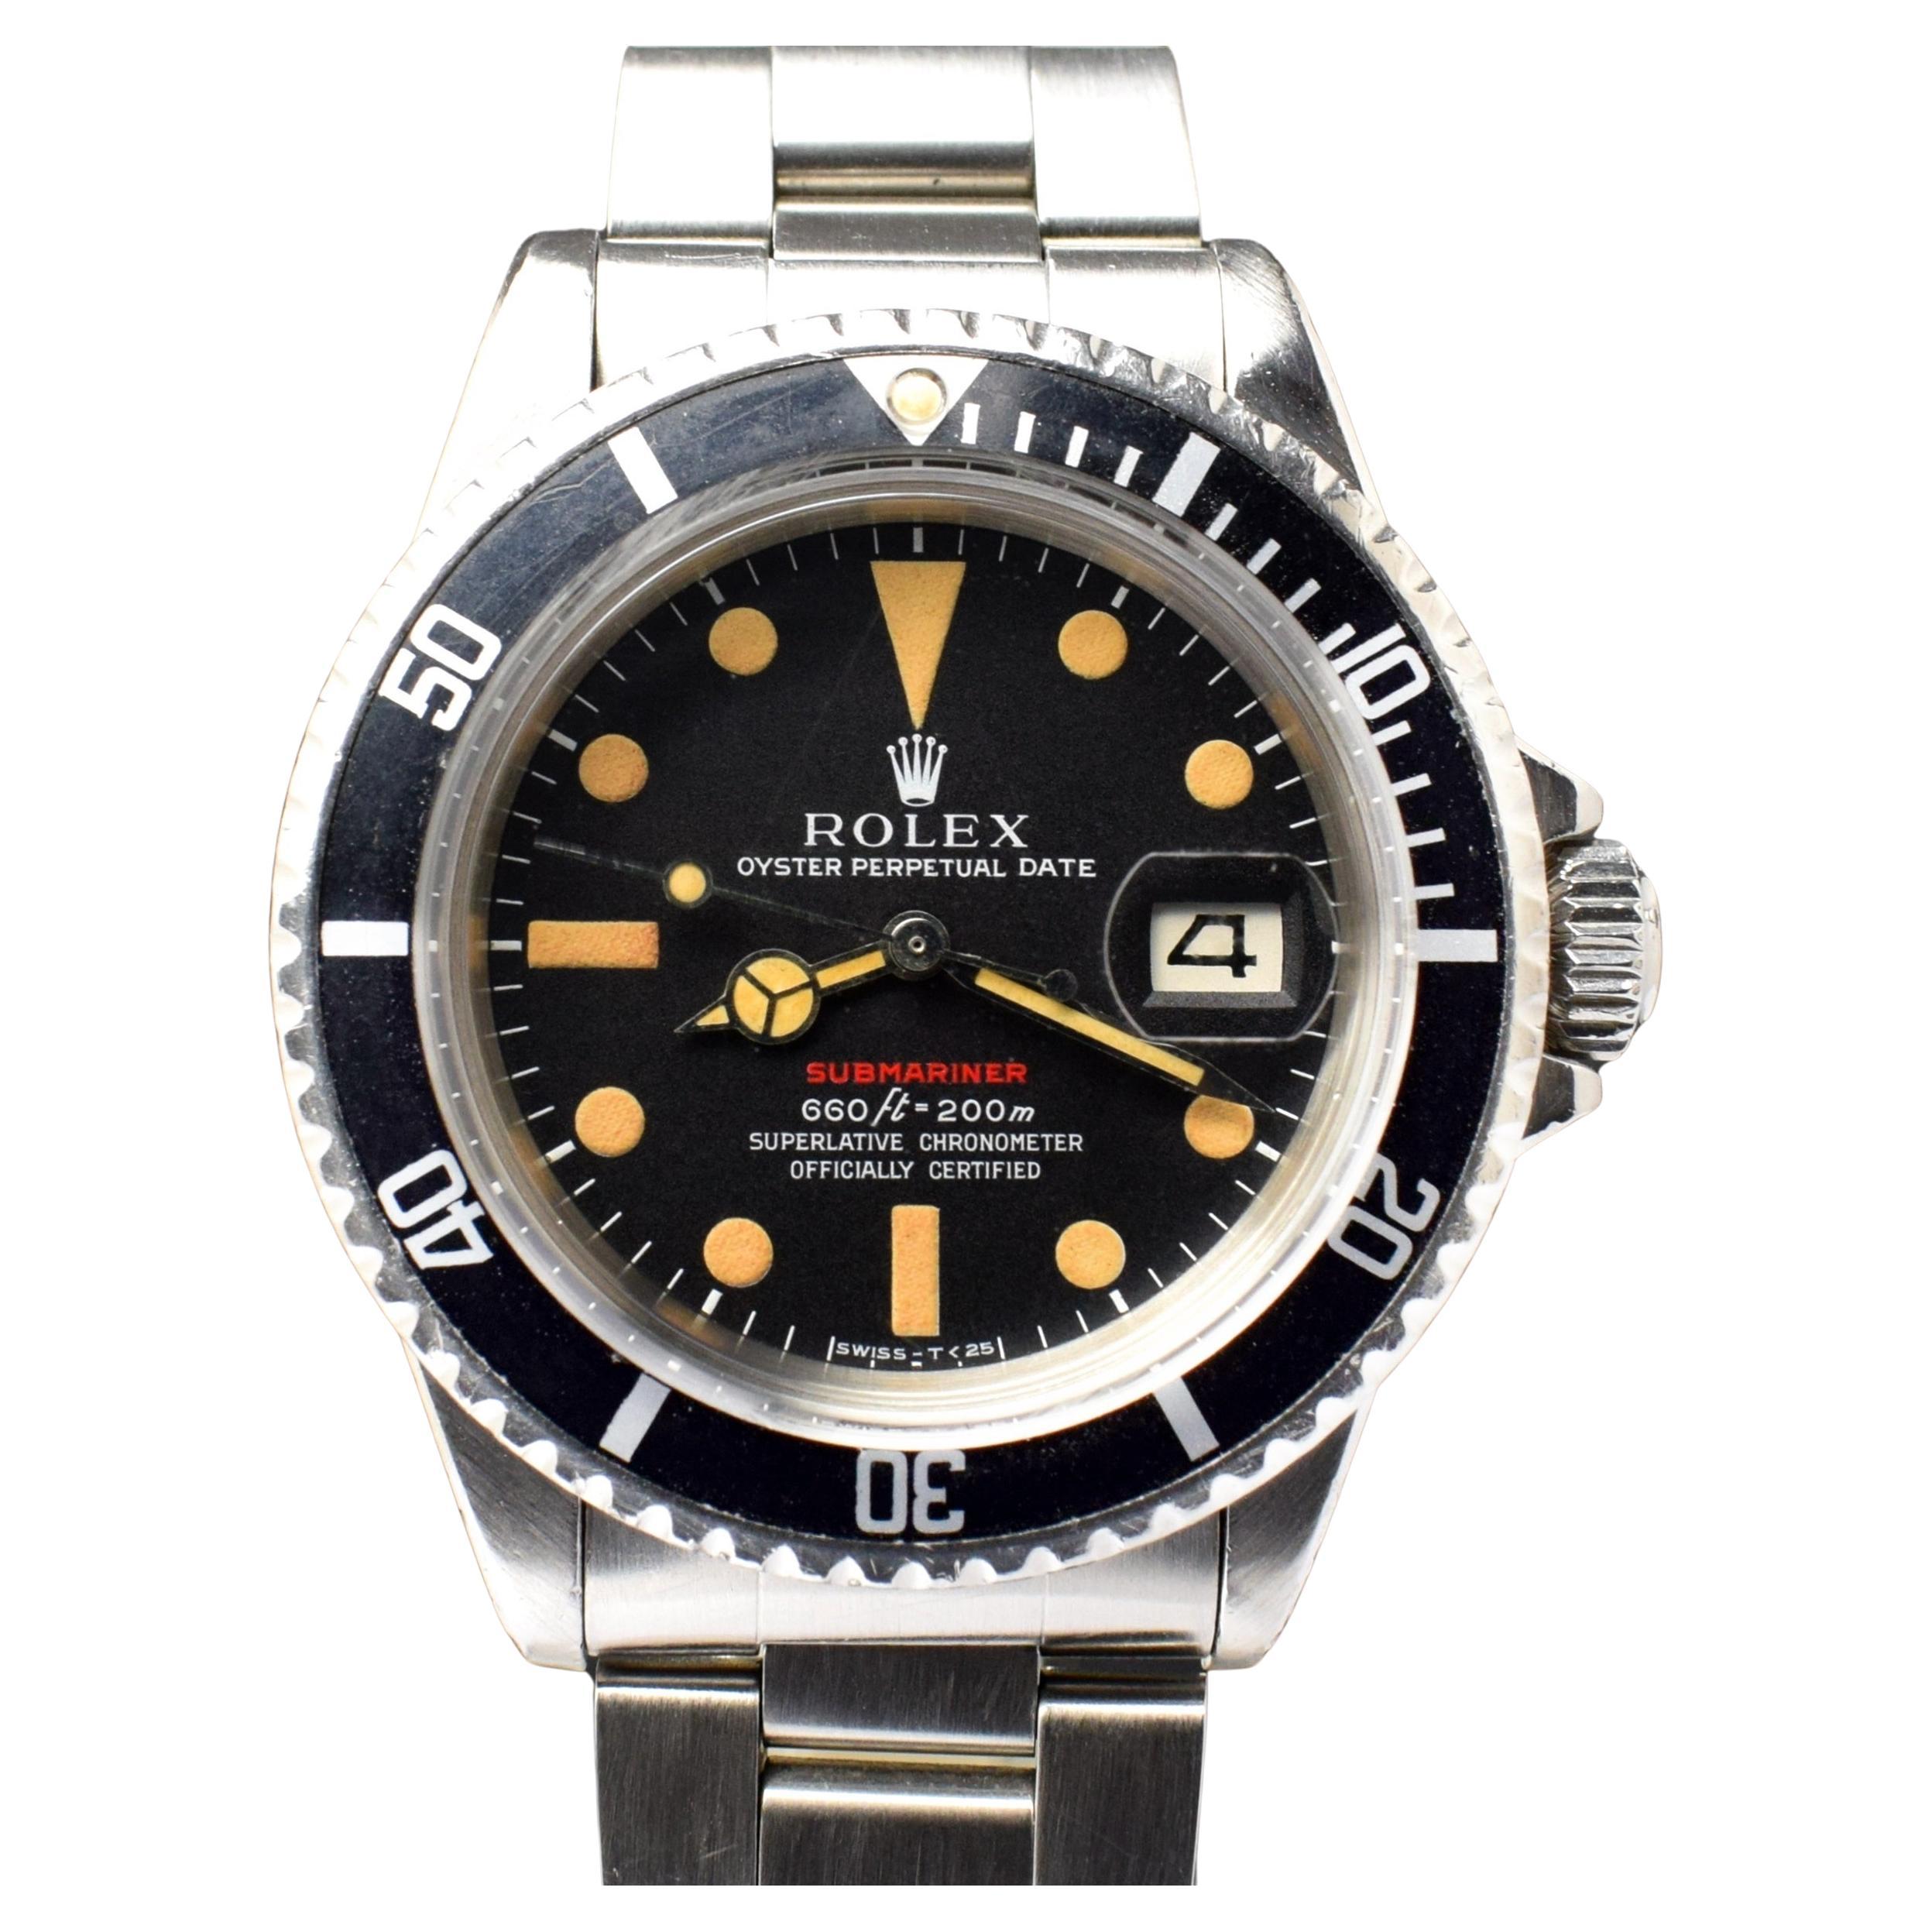 Rolex Submariner Single Red MK IV Pumpkin 1680 Steel Automatic Watch 1970 For Sale